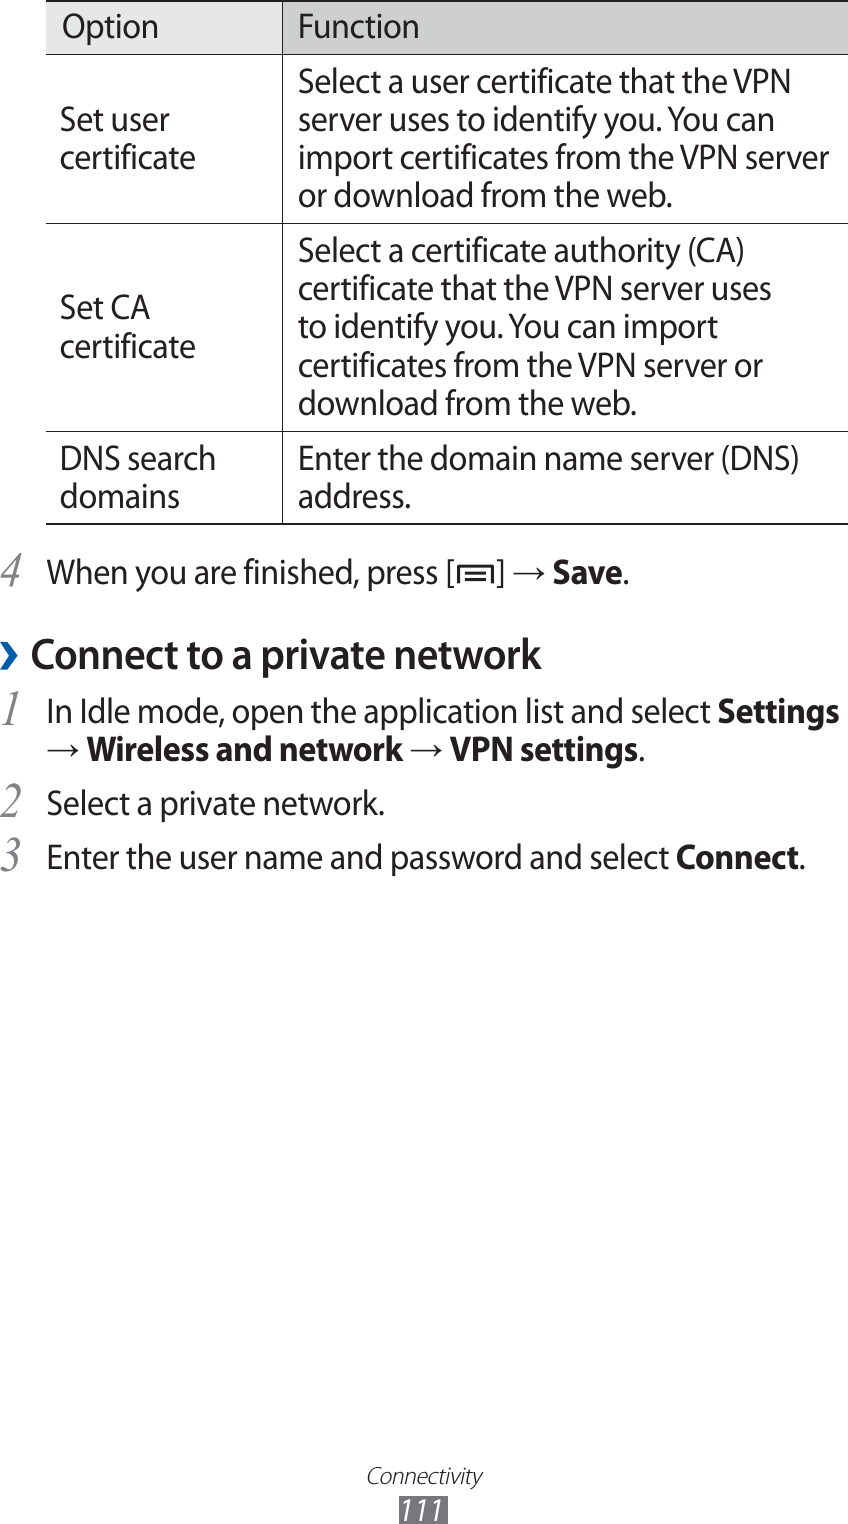 Connectivity111Option FunctionSet user certificateSelect a user certificate that the VPN server uses to identify you. You can import certificates from the VPN server or download from the web.Set CA certificateSelect a certificate authority (CA) certificate that the VPN server uses to identify you. You can import certificates from the VPN server or download from the web.DNS search domainsEnter the domain name server (DNS) address.When you are finished, press [4 ] → Save.Connect to a private network ›In Idle mode, open the application list and select 1 Settings → Wireless and network → VPN settings.Select a private network.2 Enter the user name and password and select 3 Connect.